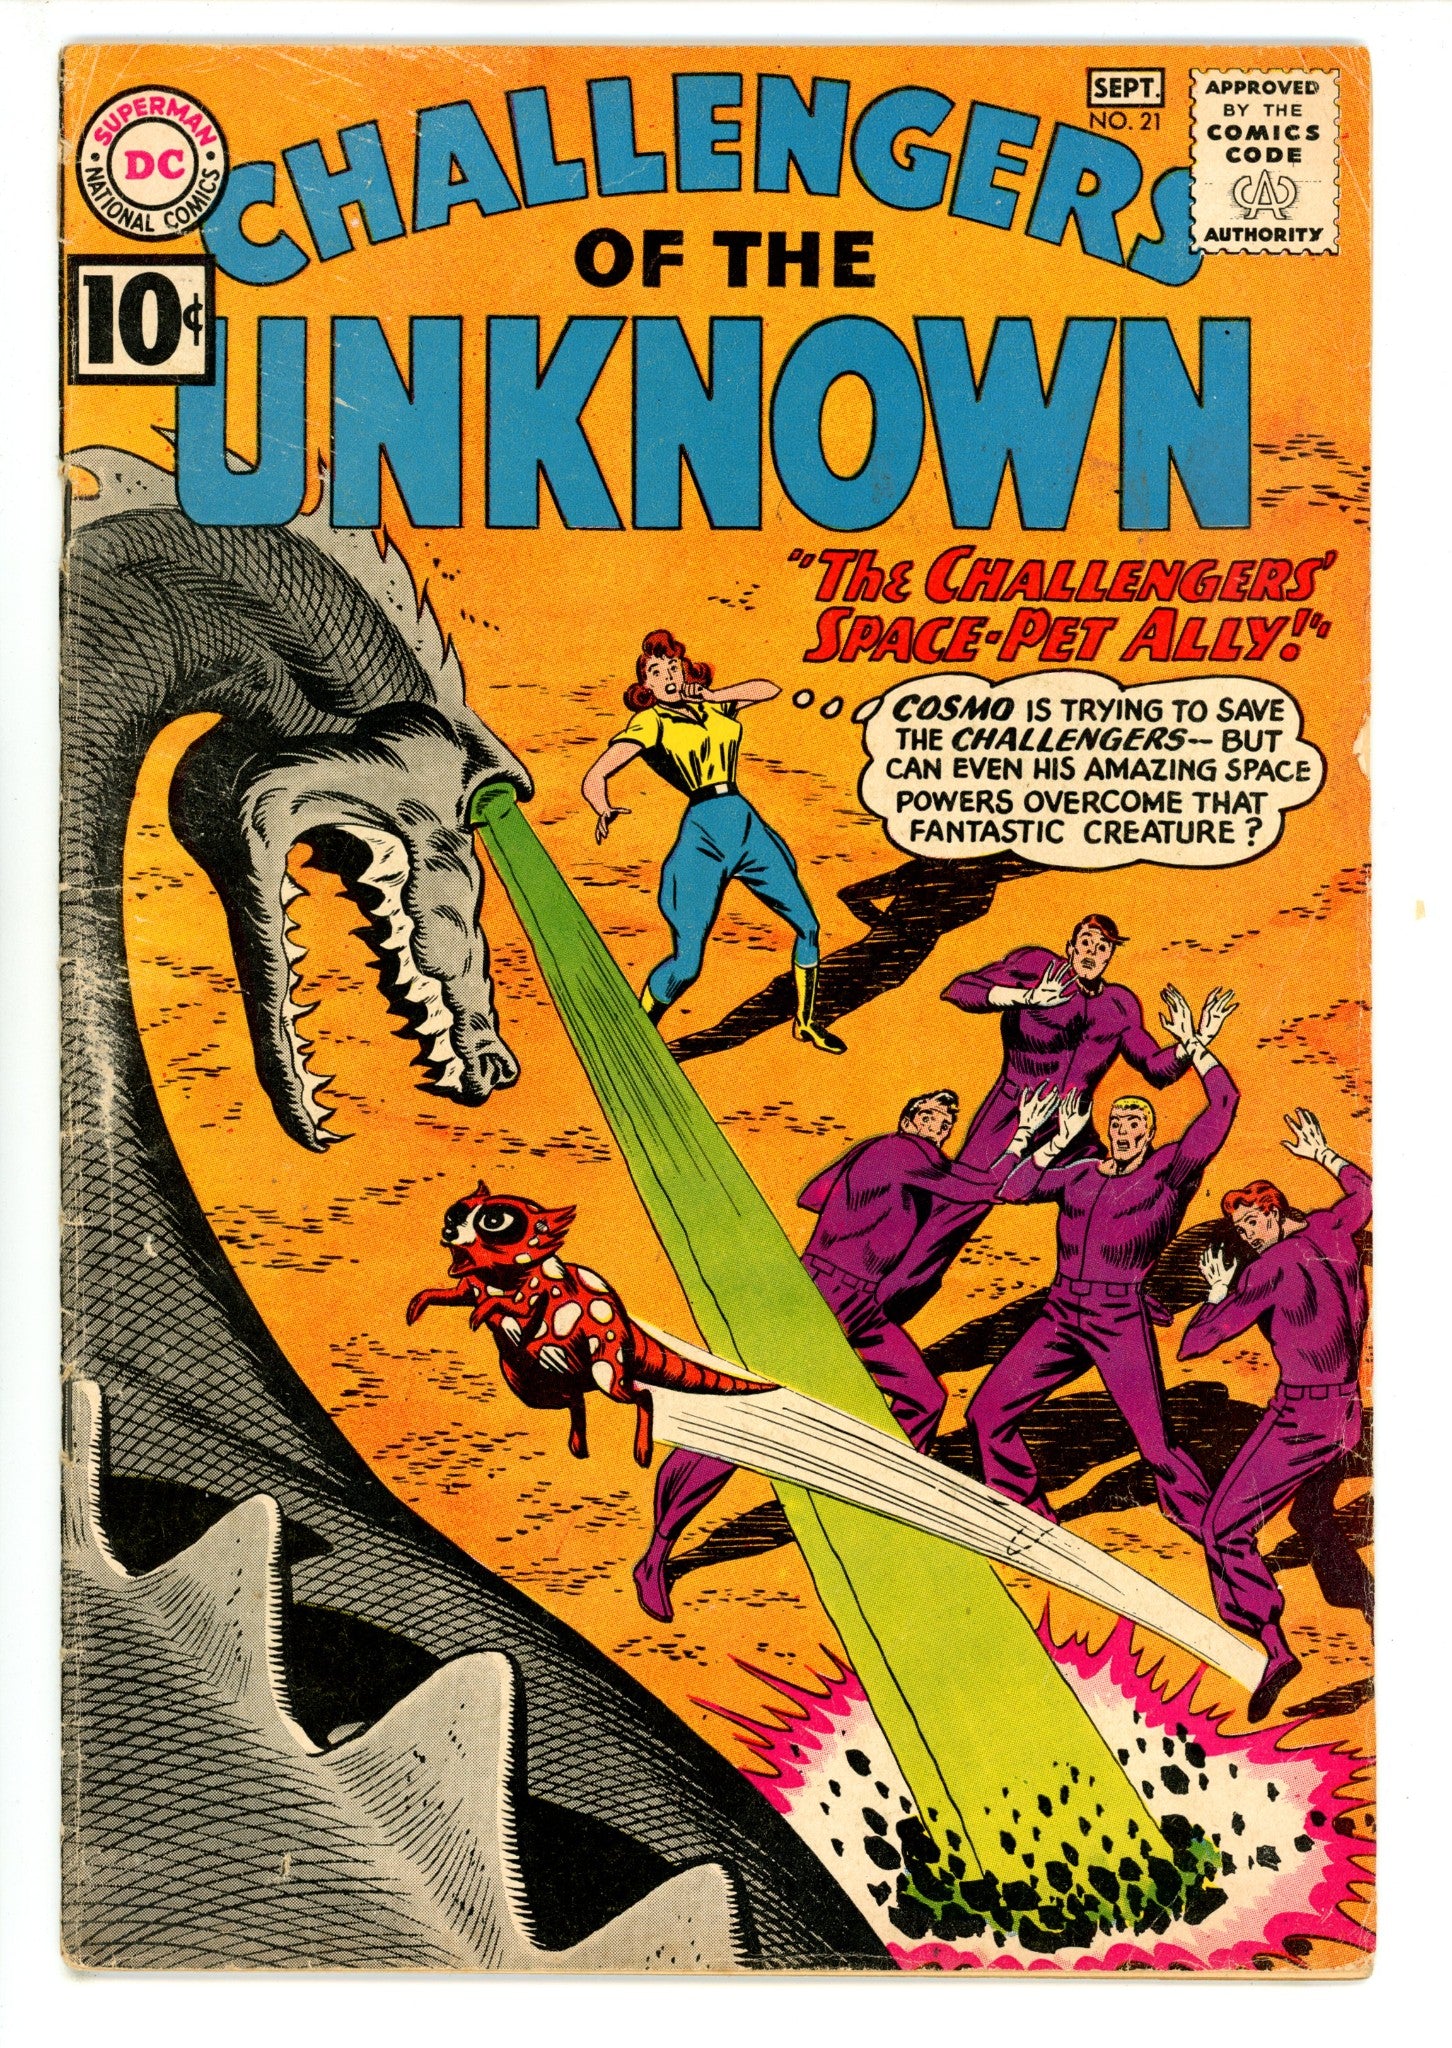 Challengers of the Unknown Vol 1 21 VG- (3.5) (1961) 